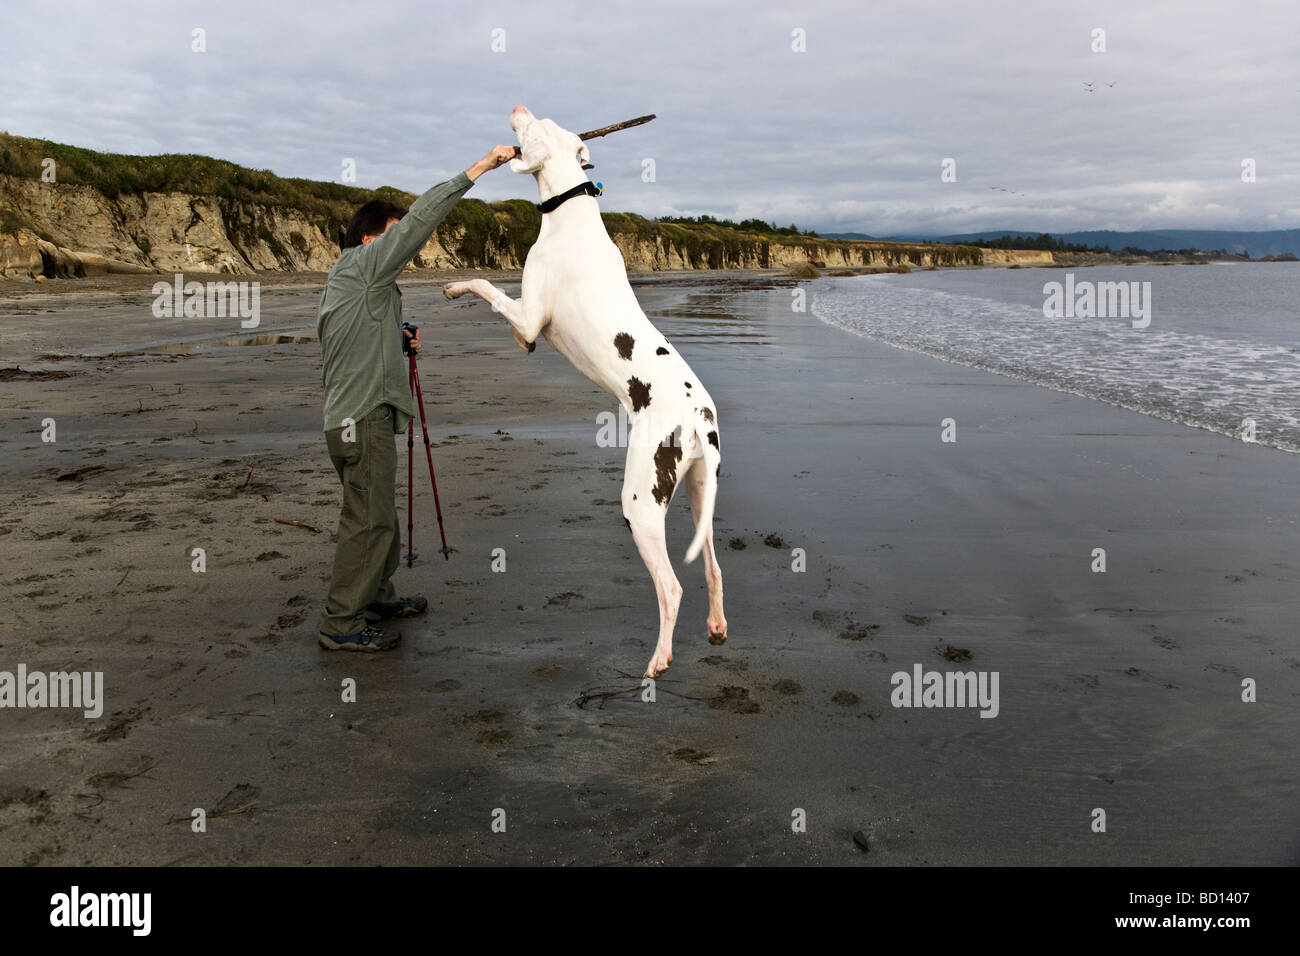 Owner preparing to throw stick for Great Dane, at the beach. Stock Photo